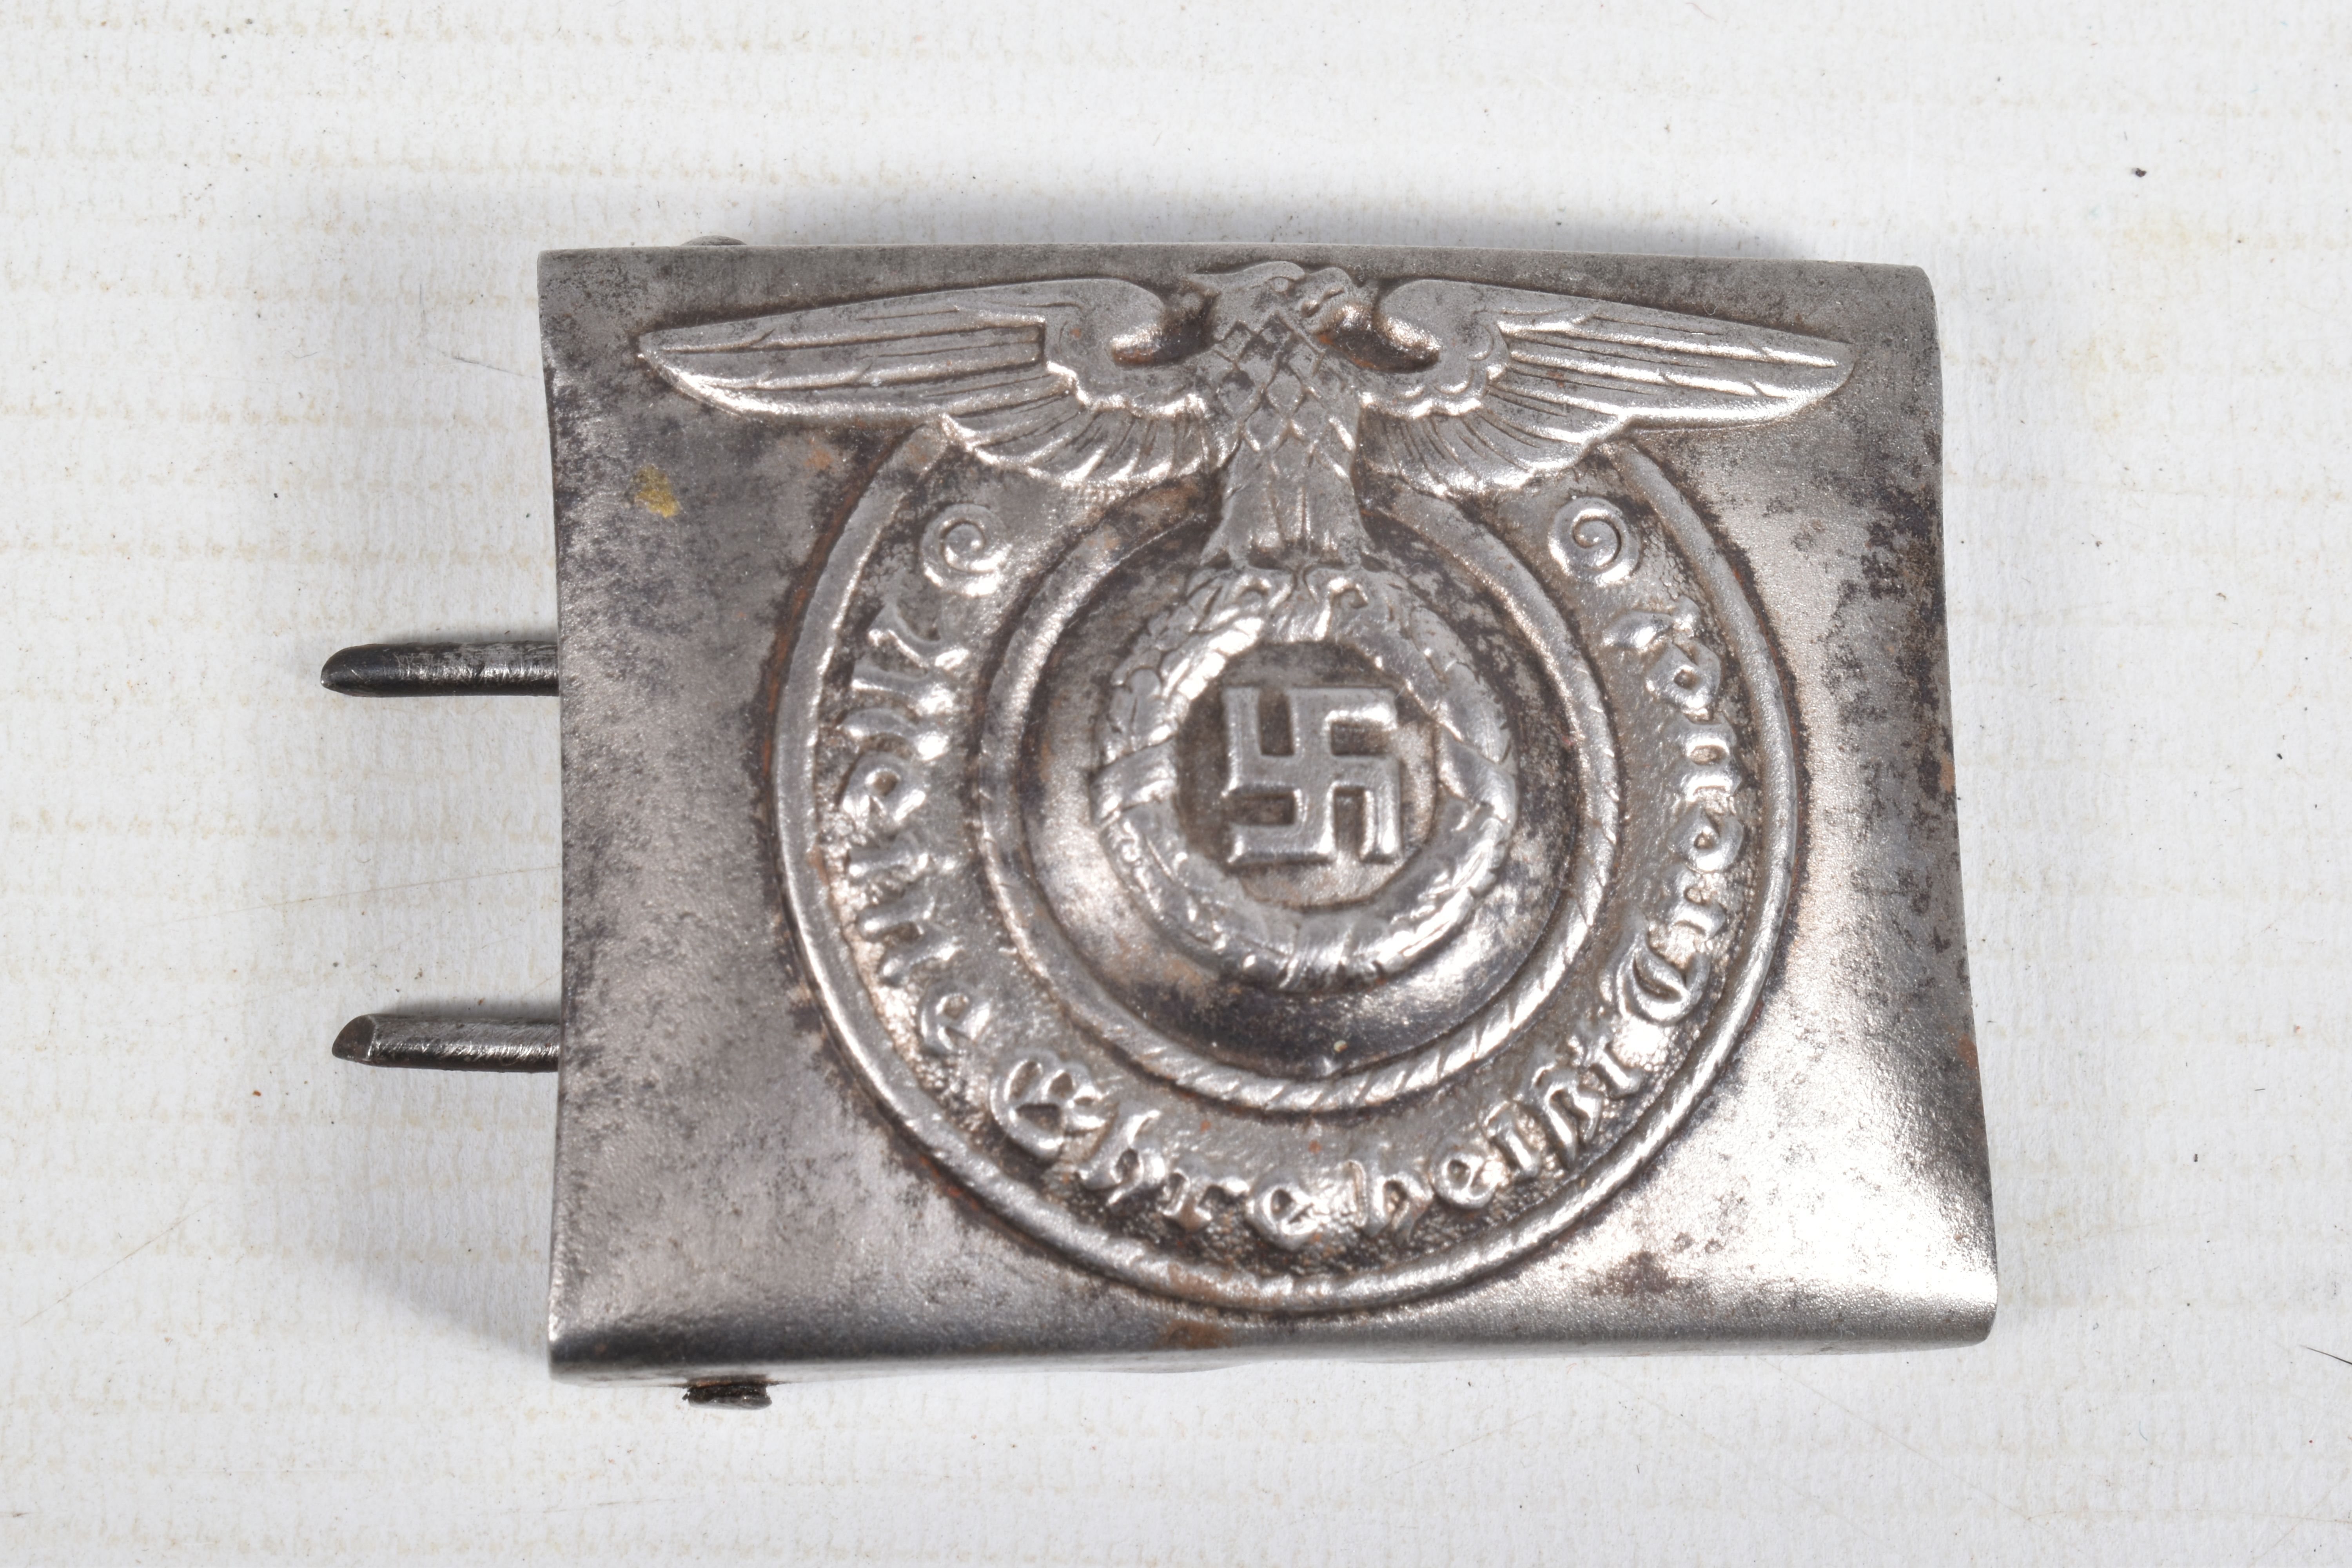 FOUR GERMAN WWII STYLE BELT BUCKLES, these buckles include one Luftwaffe and three SS buckles, the - Image 3 of 11